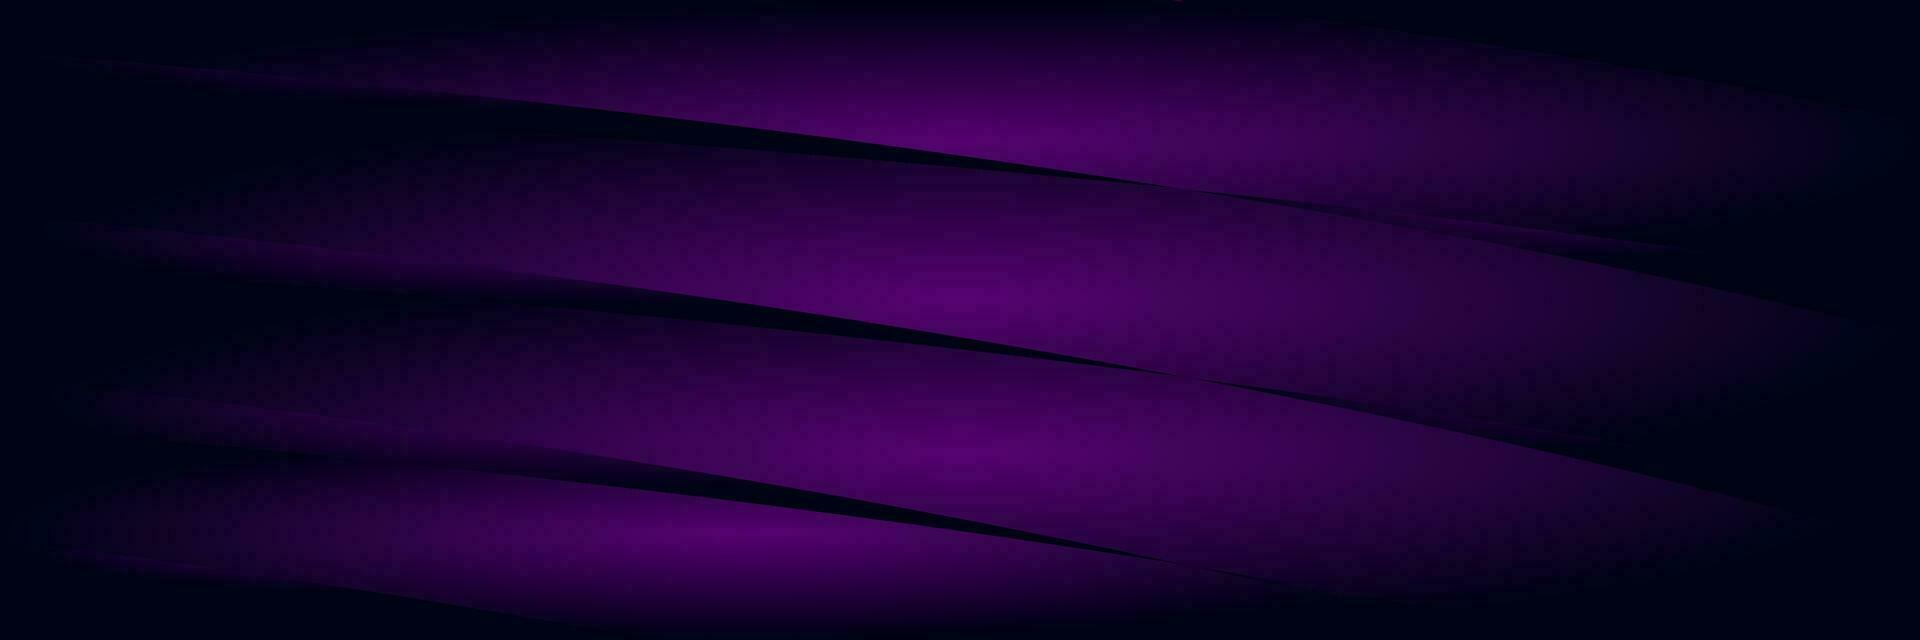 abstract elegant dark purple pink background for business vector